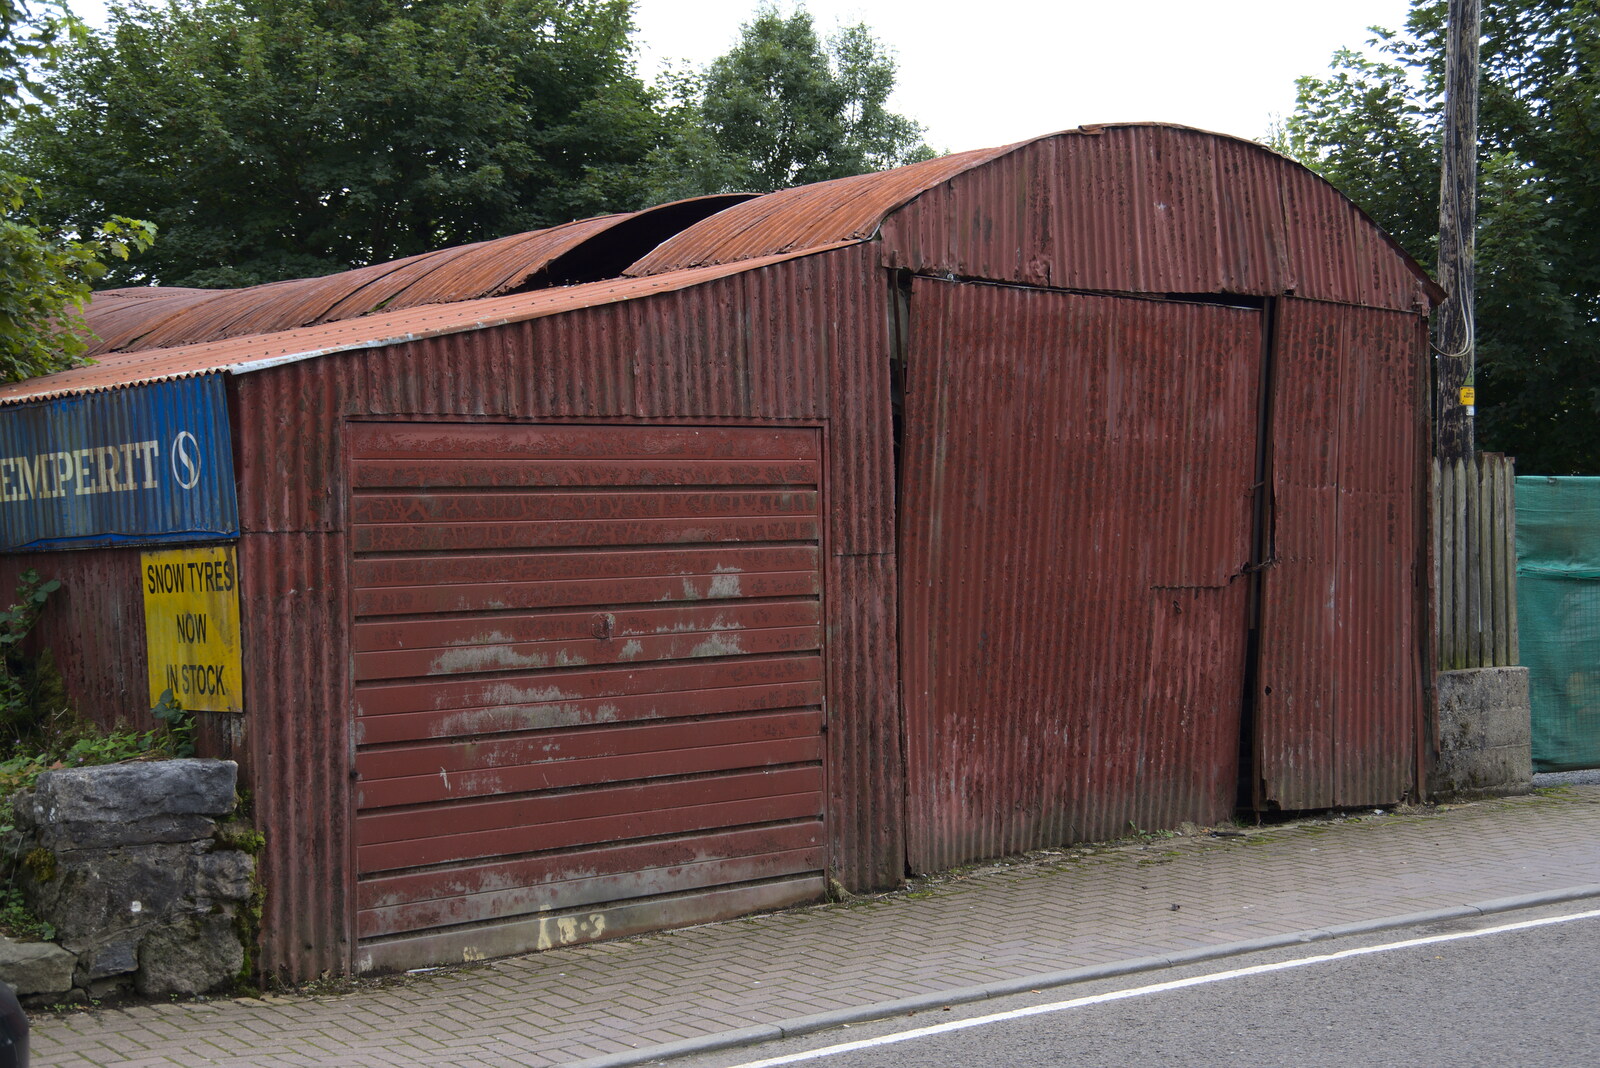 A Trip to Manorhamilton, County Leitrim, Ireland - 11th August 2021: A derelict tin shed